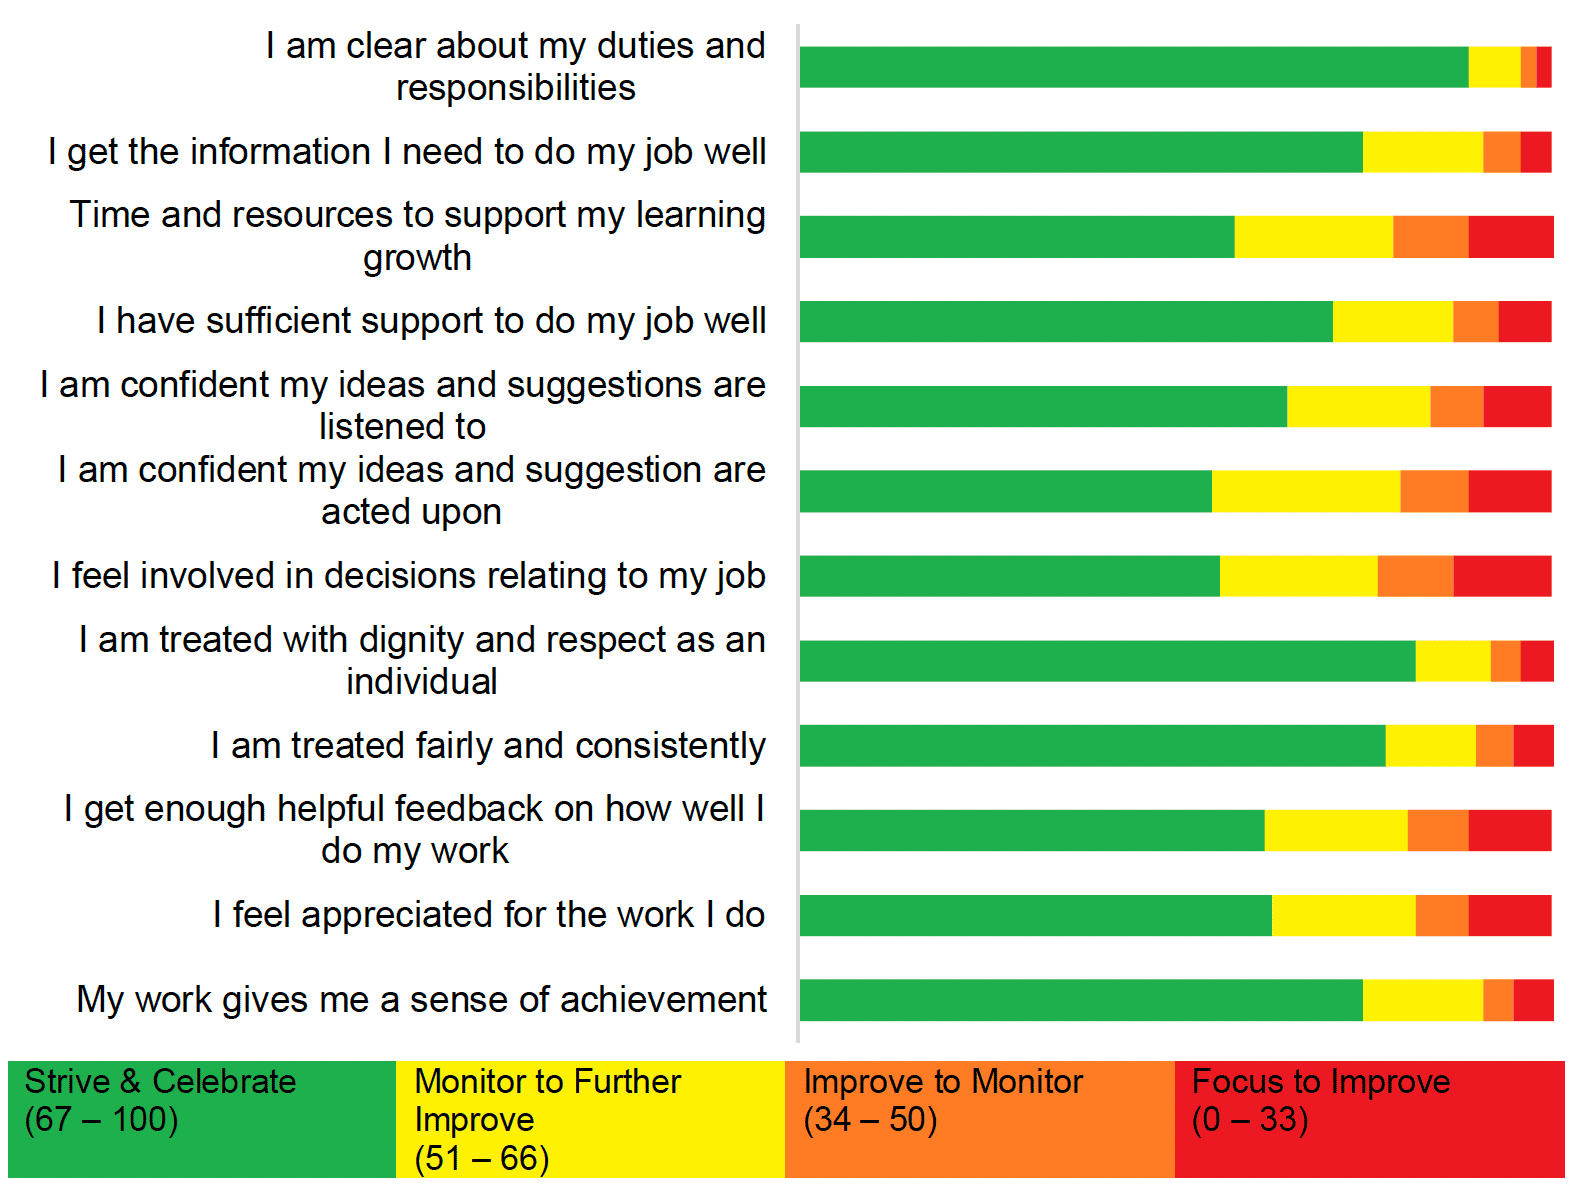 Bar chart showing score distribution for components in My Experience as an Individual, which is detailed in the table following the chart.